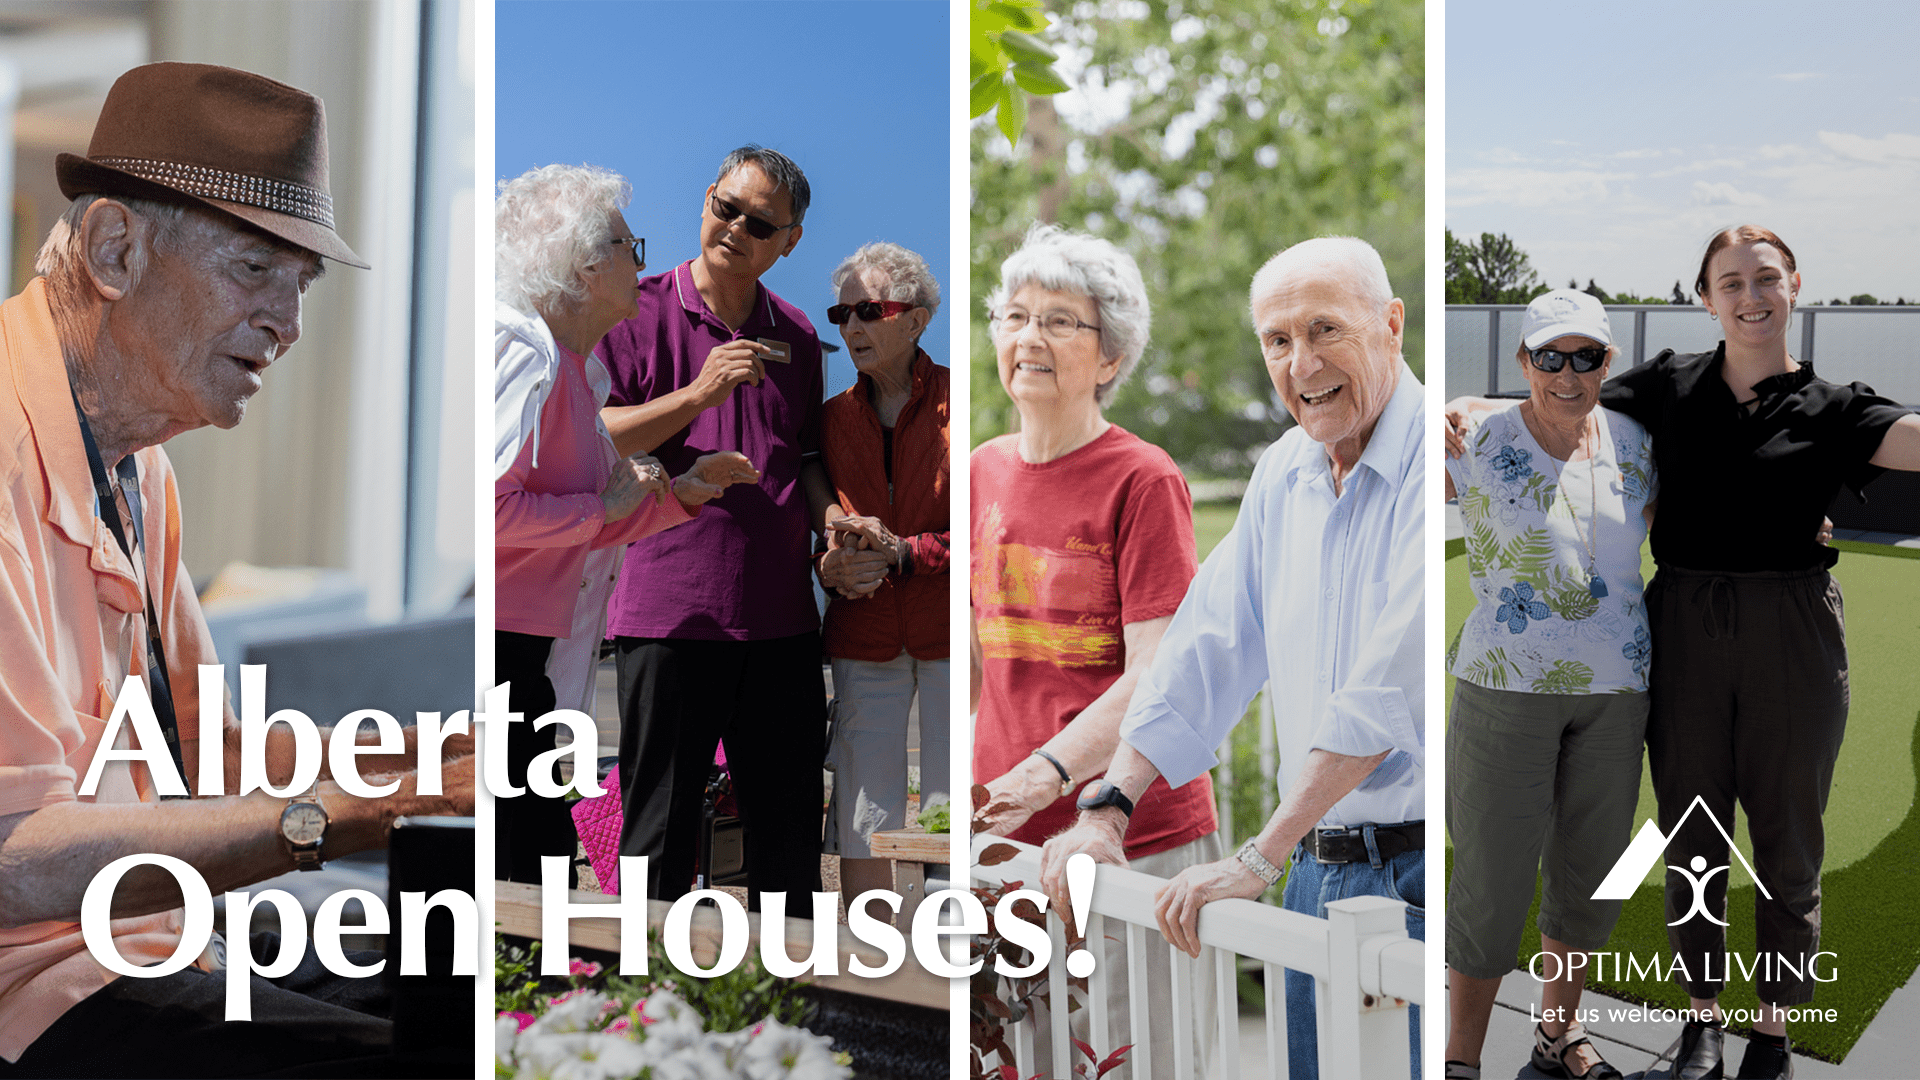 Images of seniors being active outdoors